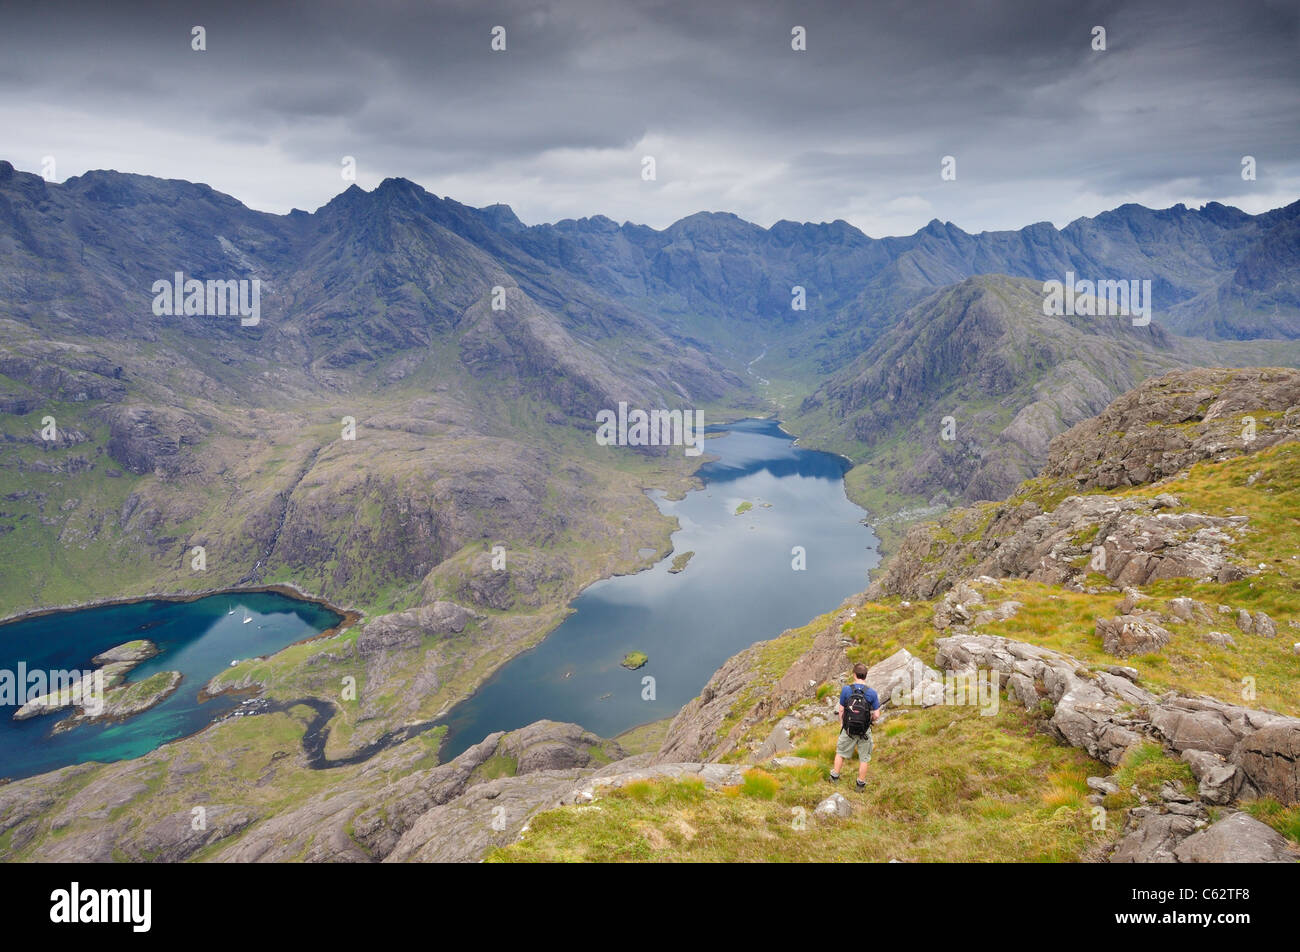 Male walker admiring the view over Loch Coruisk to the jagged ridge of the Black Cuillin mountains, Isle of Skye, Scotland Stock Photo